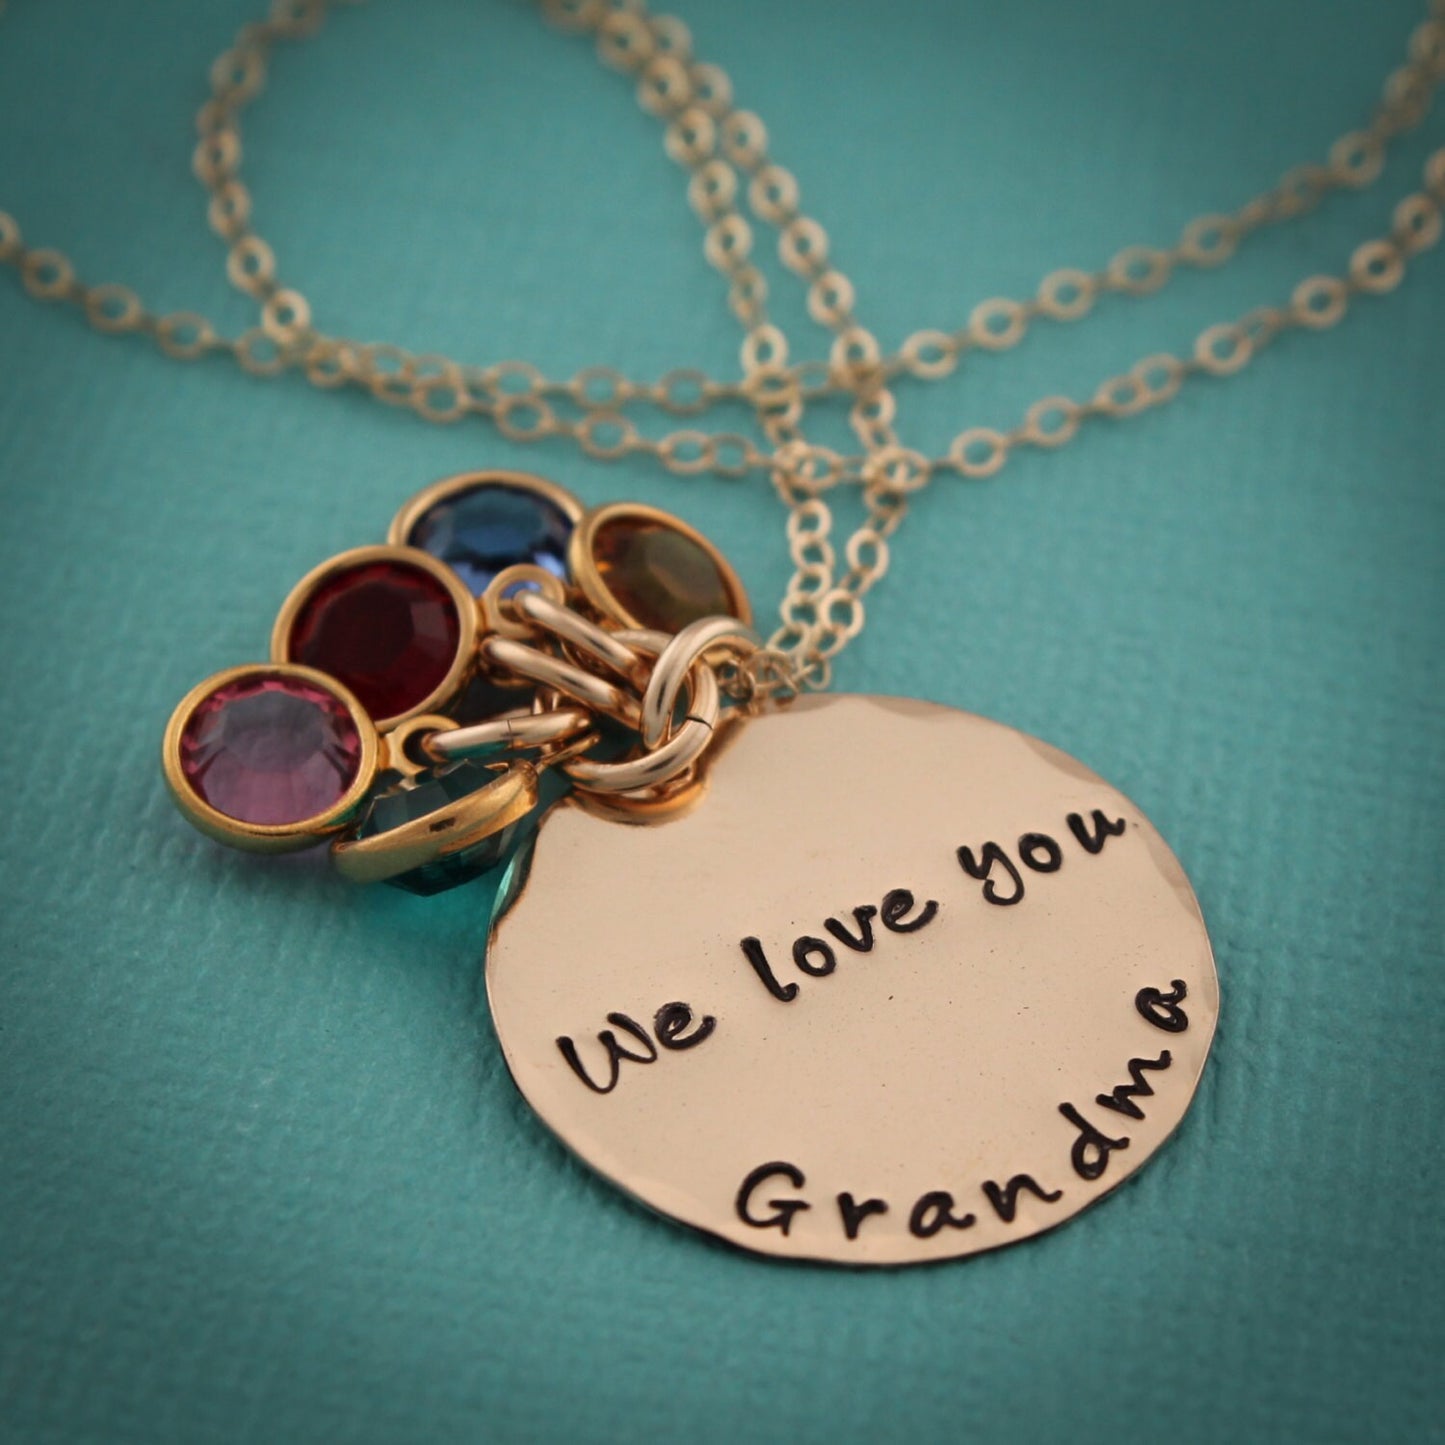 Gold Grandma Necklace with Birthstones Grandmother Necklace in 14K Gold Filled Hand Stamped Jewelry